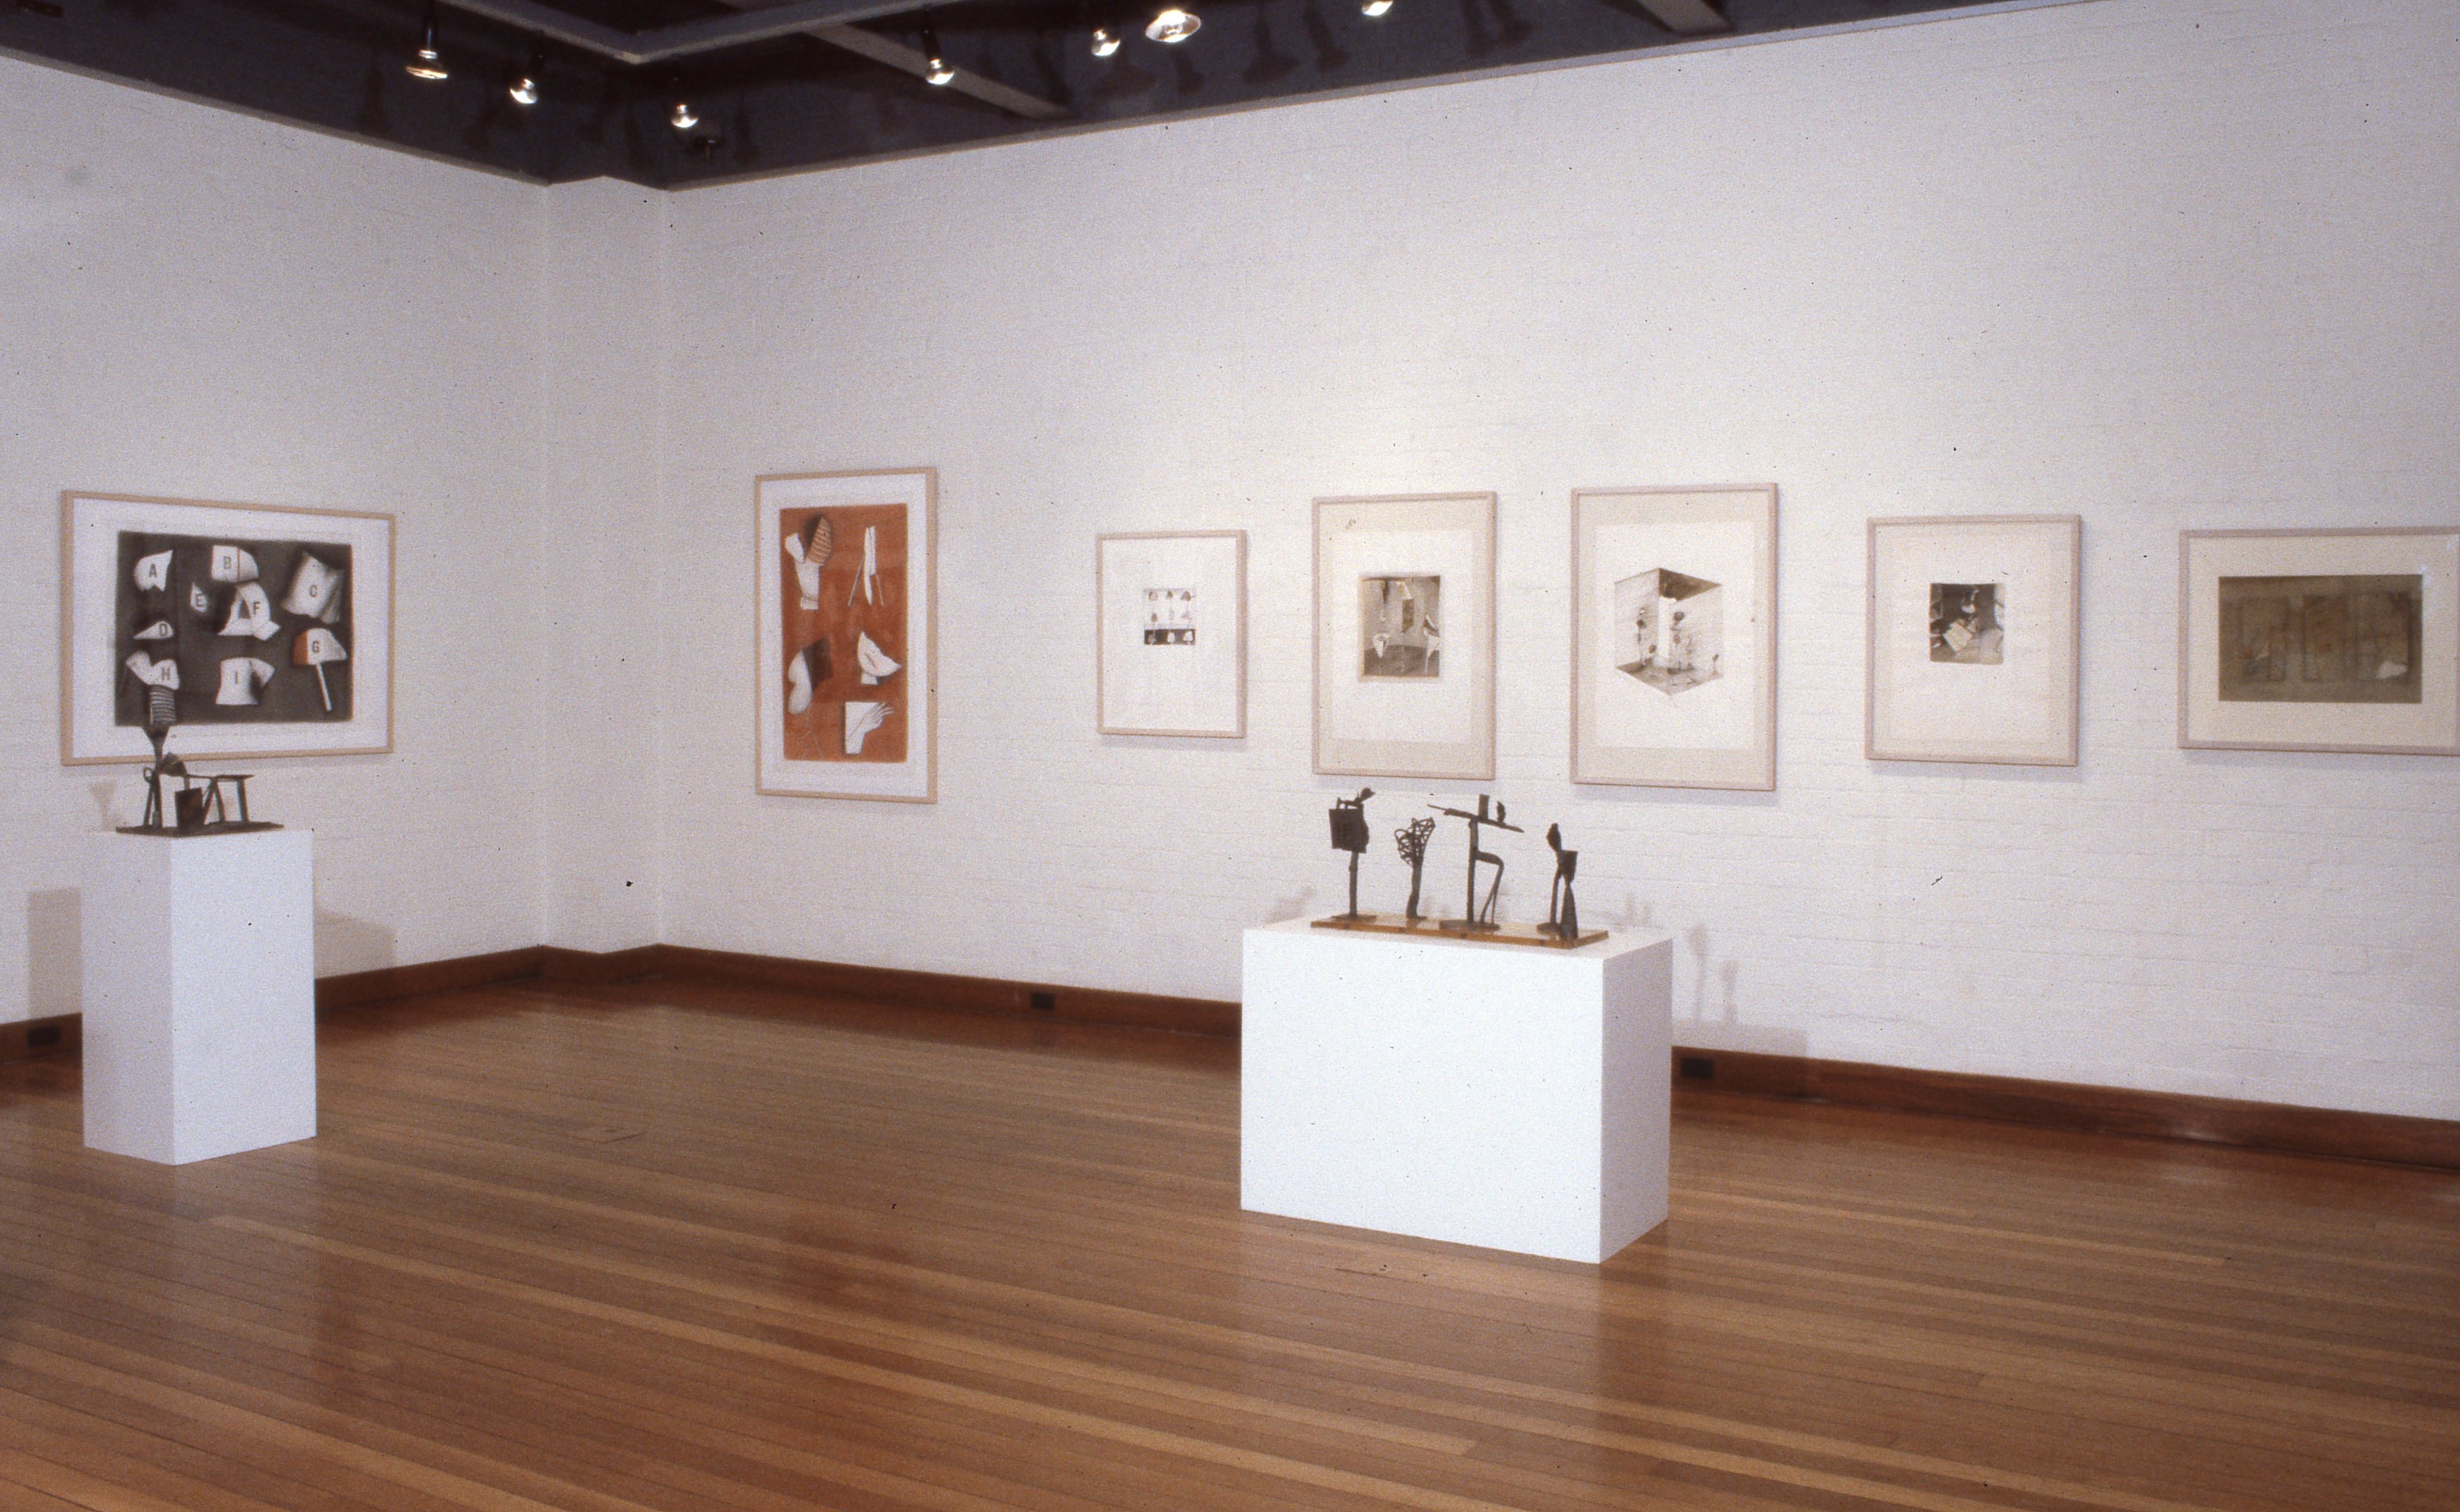 idg_archive_1991_george_baldessin_1939-1978_drawings_and_selected_scupture_002_copy_install.jpg